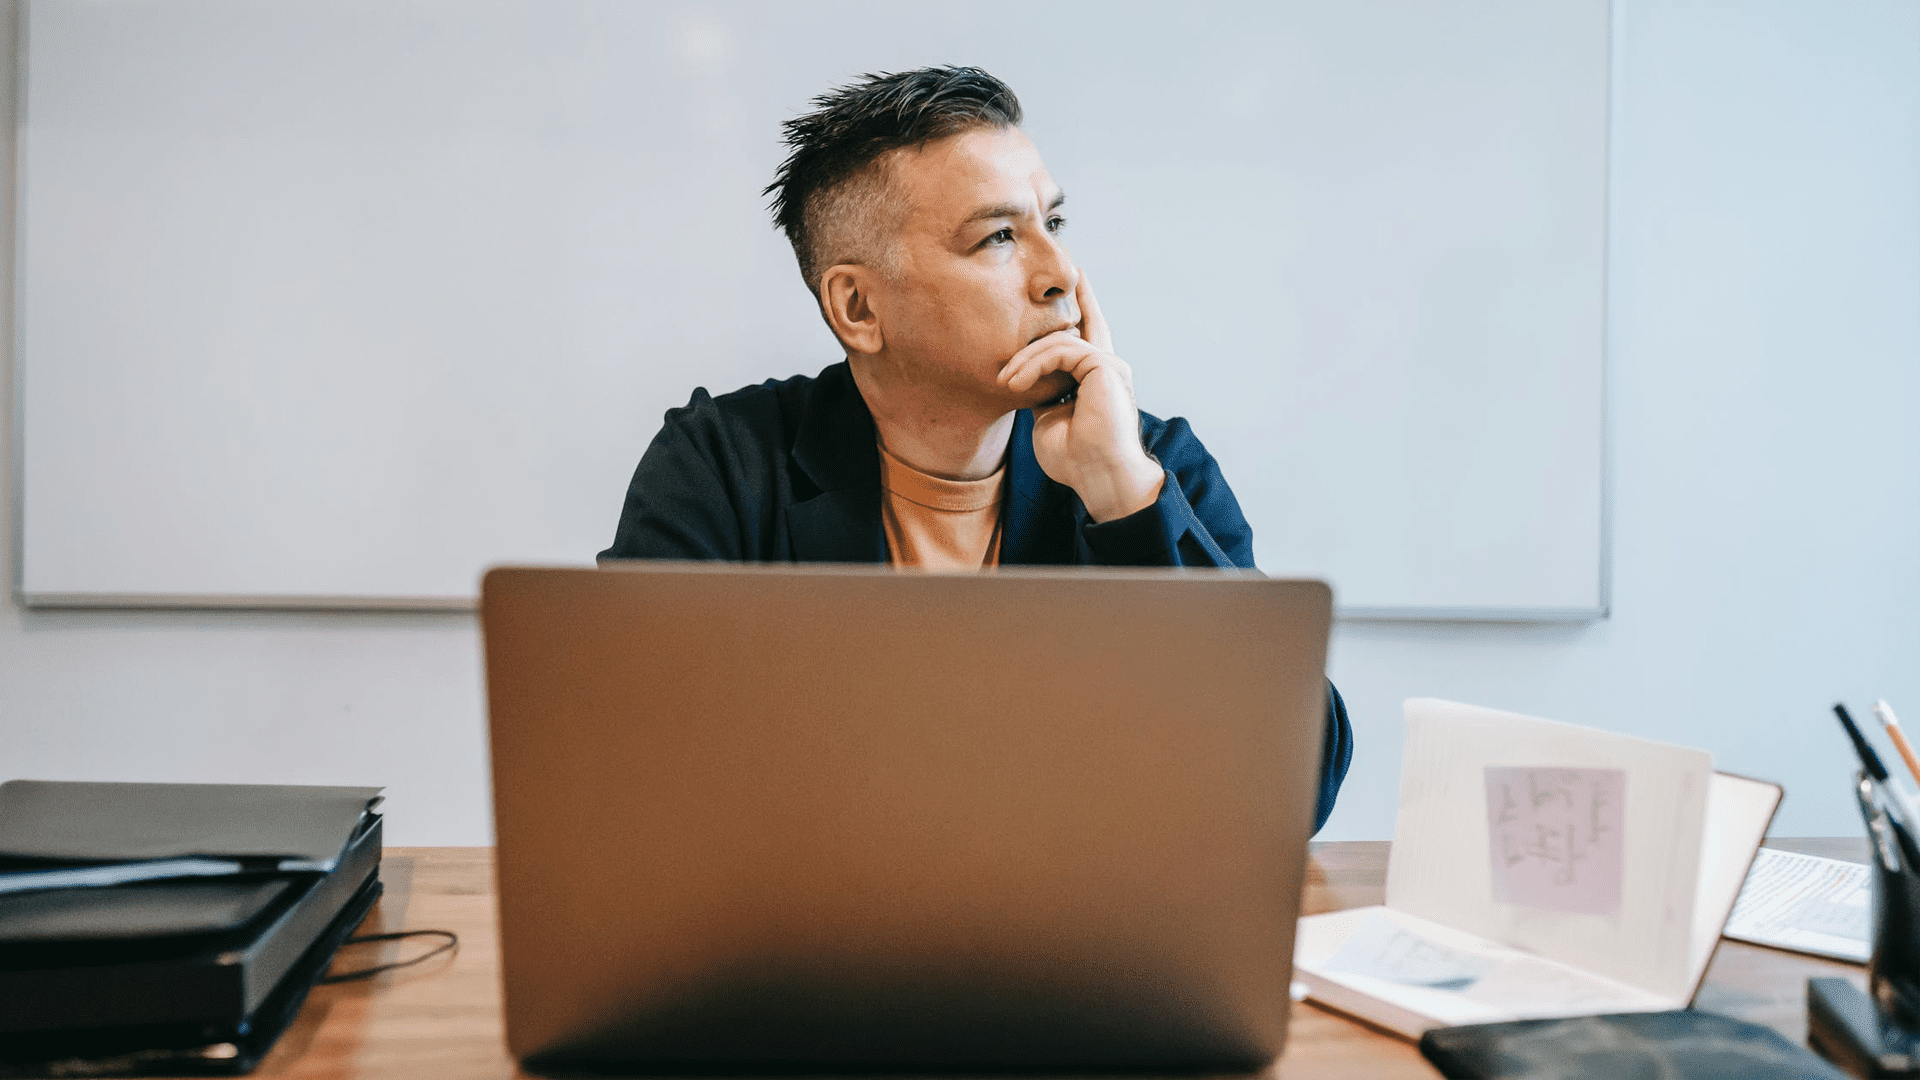 stock image showing a man in front of a laptop thinking about why a good marketing strategy takes time